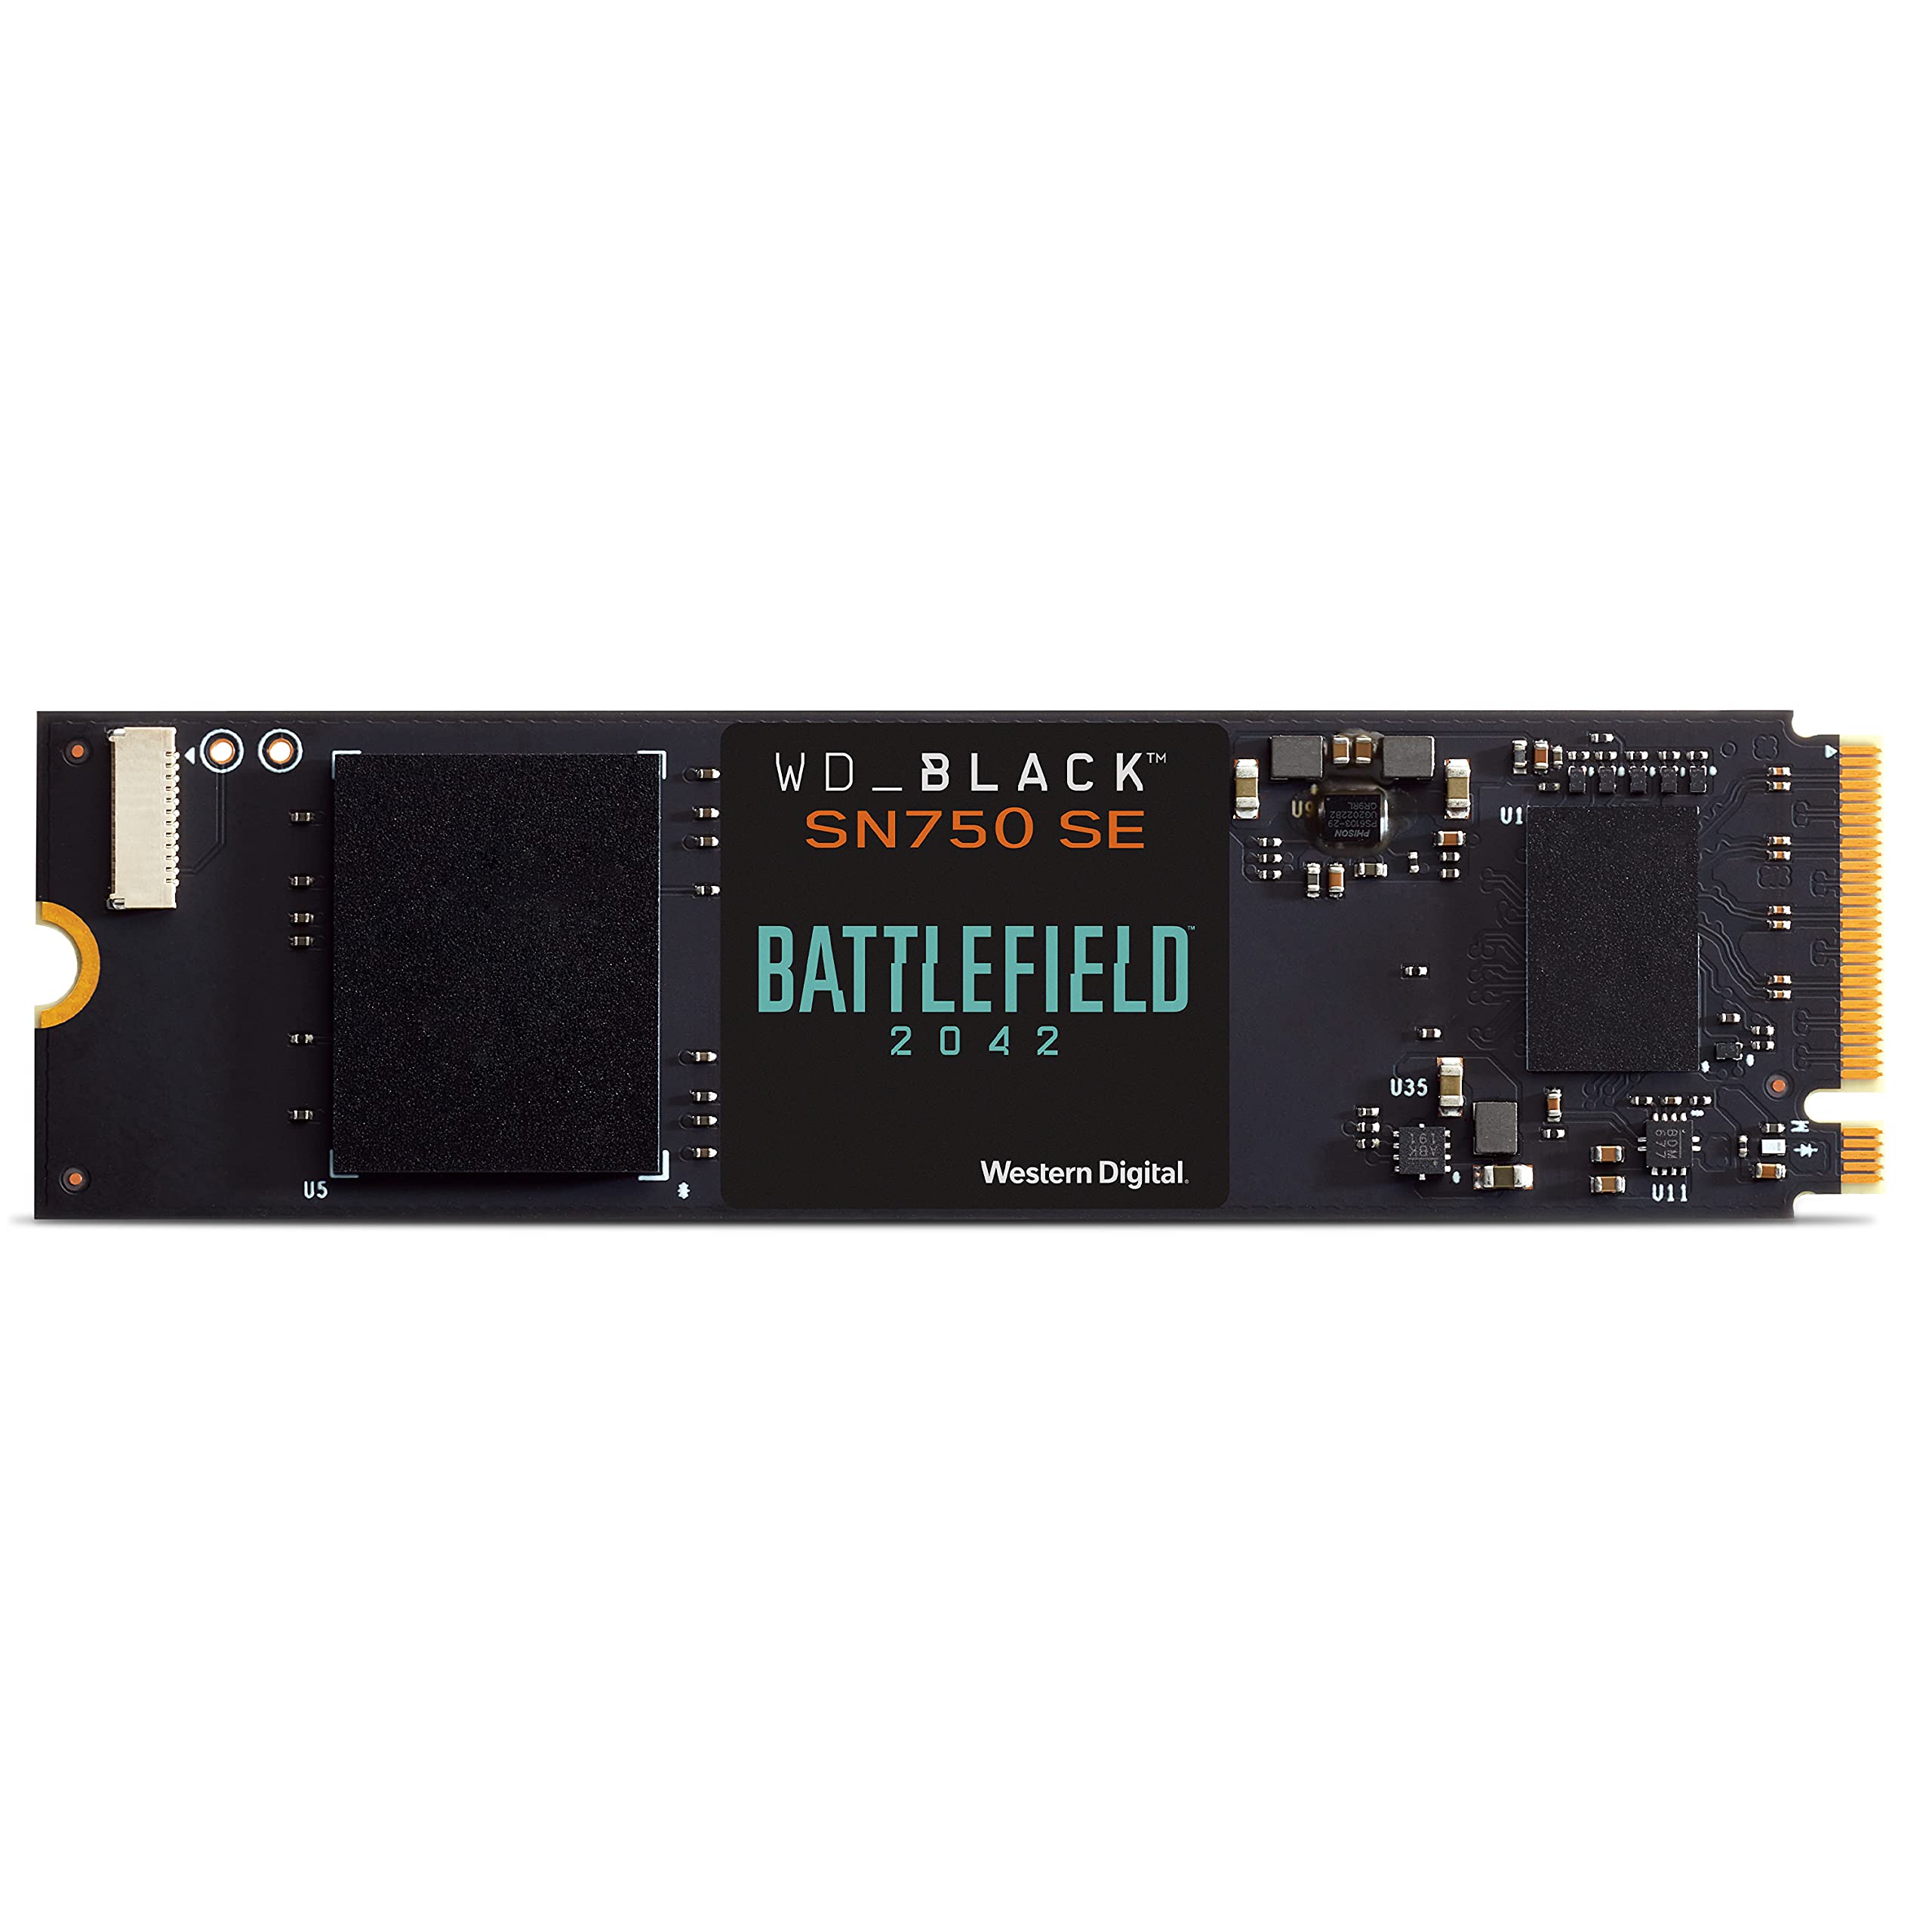 WDBLACK 500GB SN750 SE NVMe SSD with Battlefield 2042 Game Code Bundle - Gen4 PCle Internal Gaming SSD Solid State Drive M